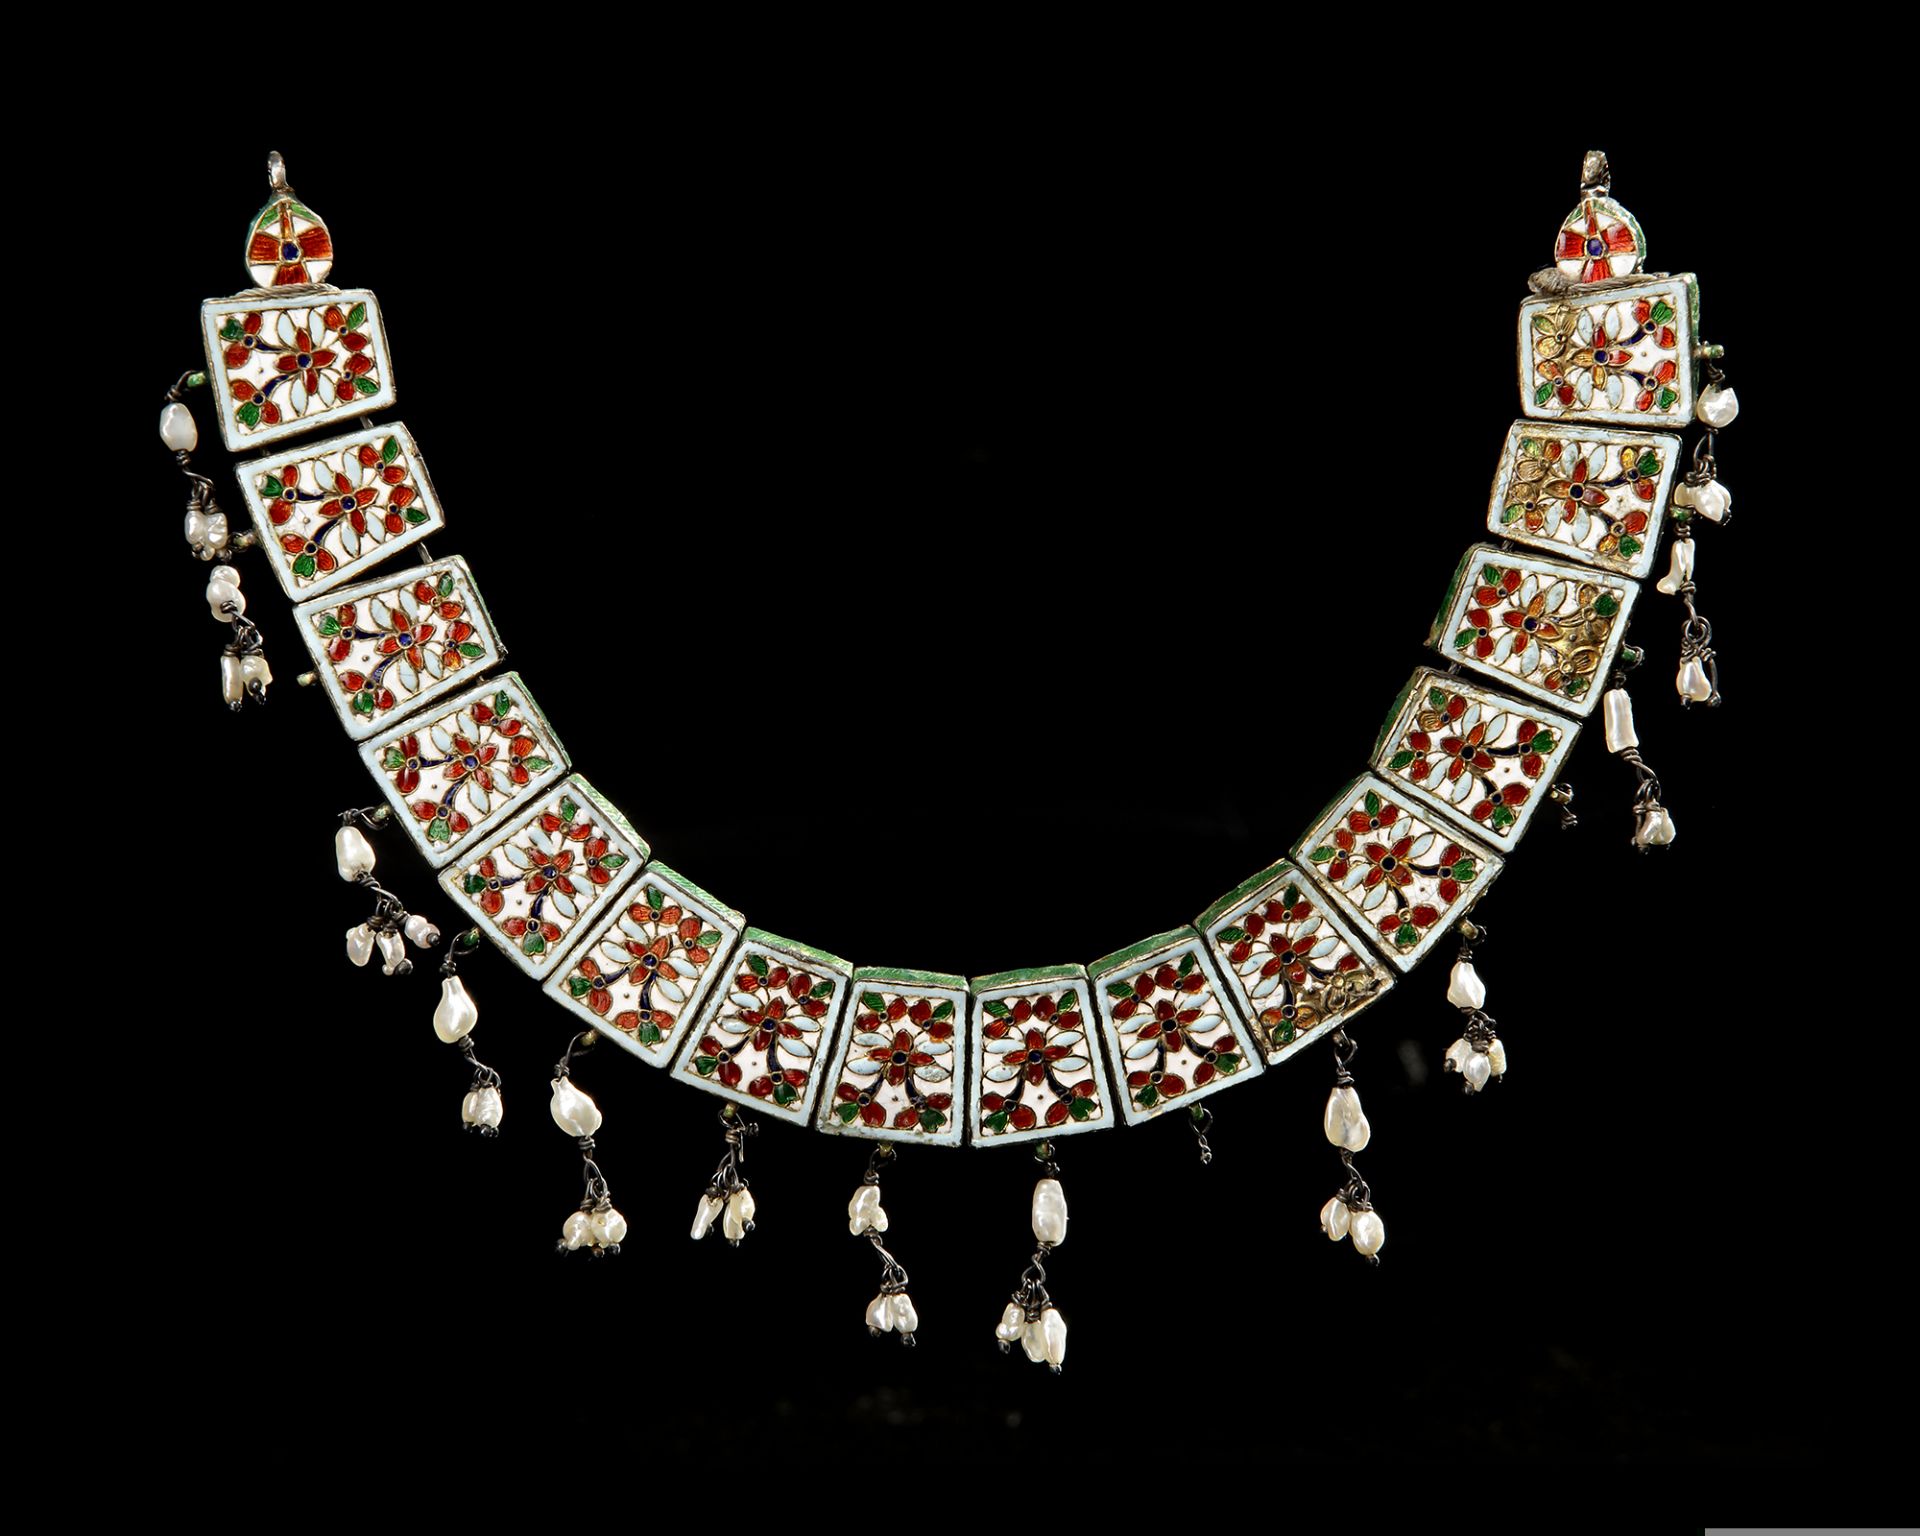 A MUGHAL GEM-SET ENAMELED GOLD NECKLACE, LATE 18TH CENTURY - Image 4 of 6